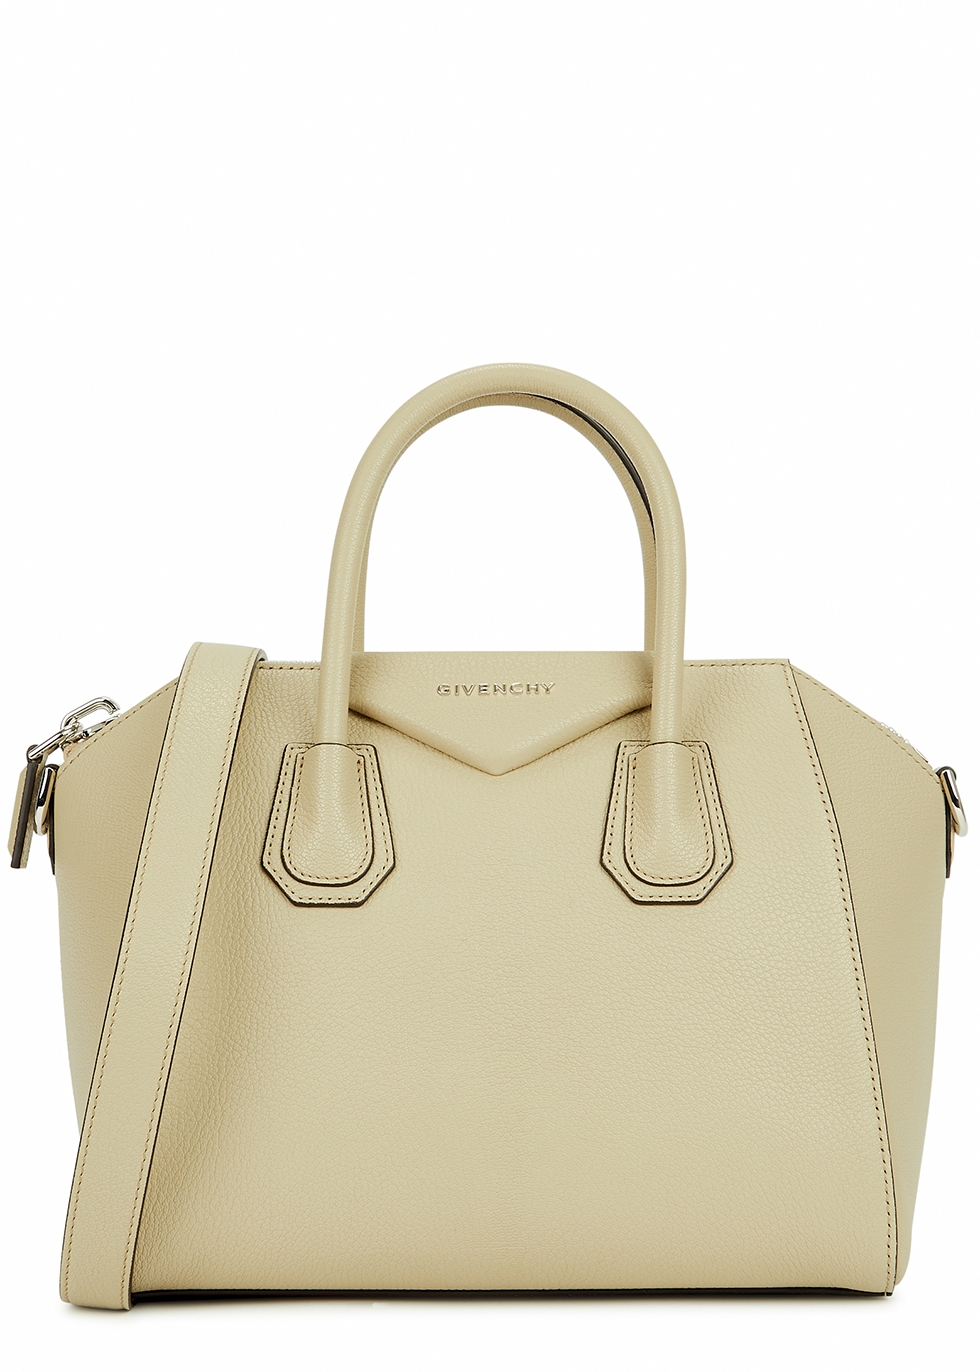 Givenchy - Designer Clothing, Bags 